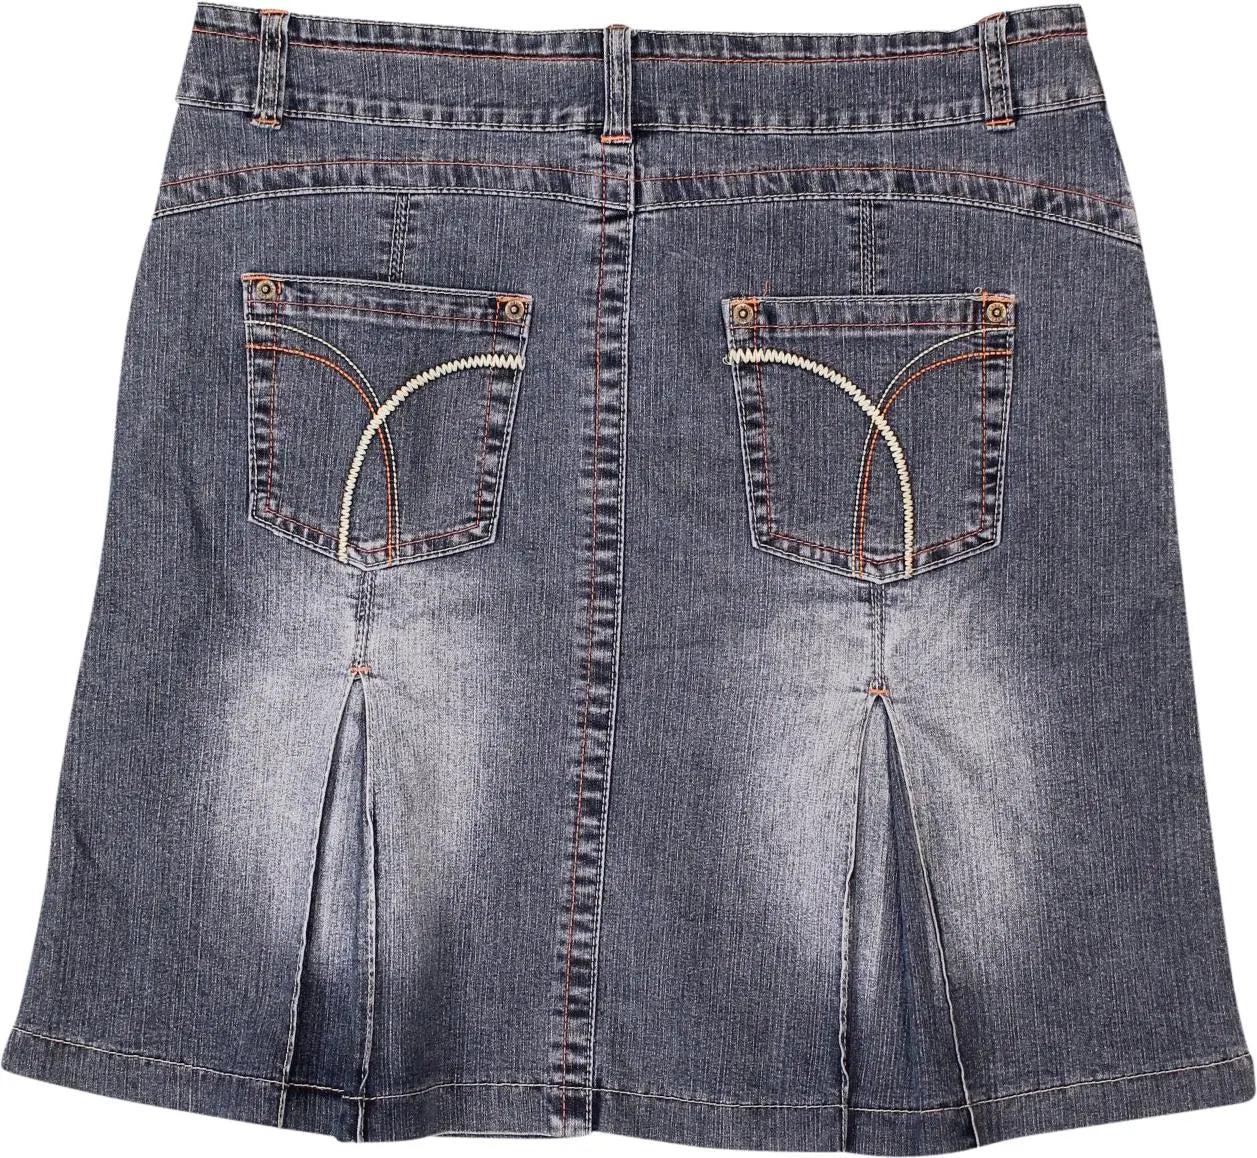 Casual Clothing - Short denim skirt- ThriftTale.com - Vintage and second handclothing